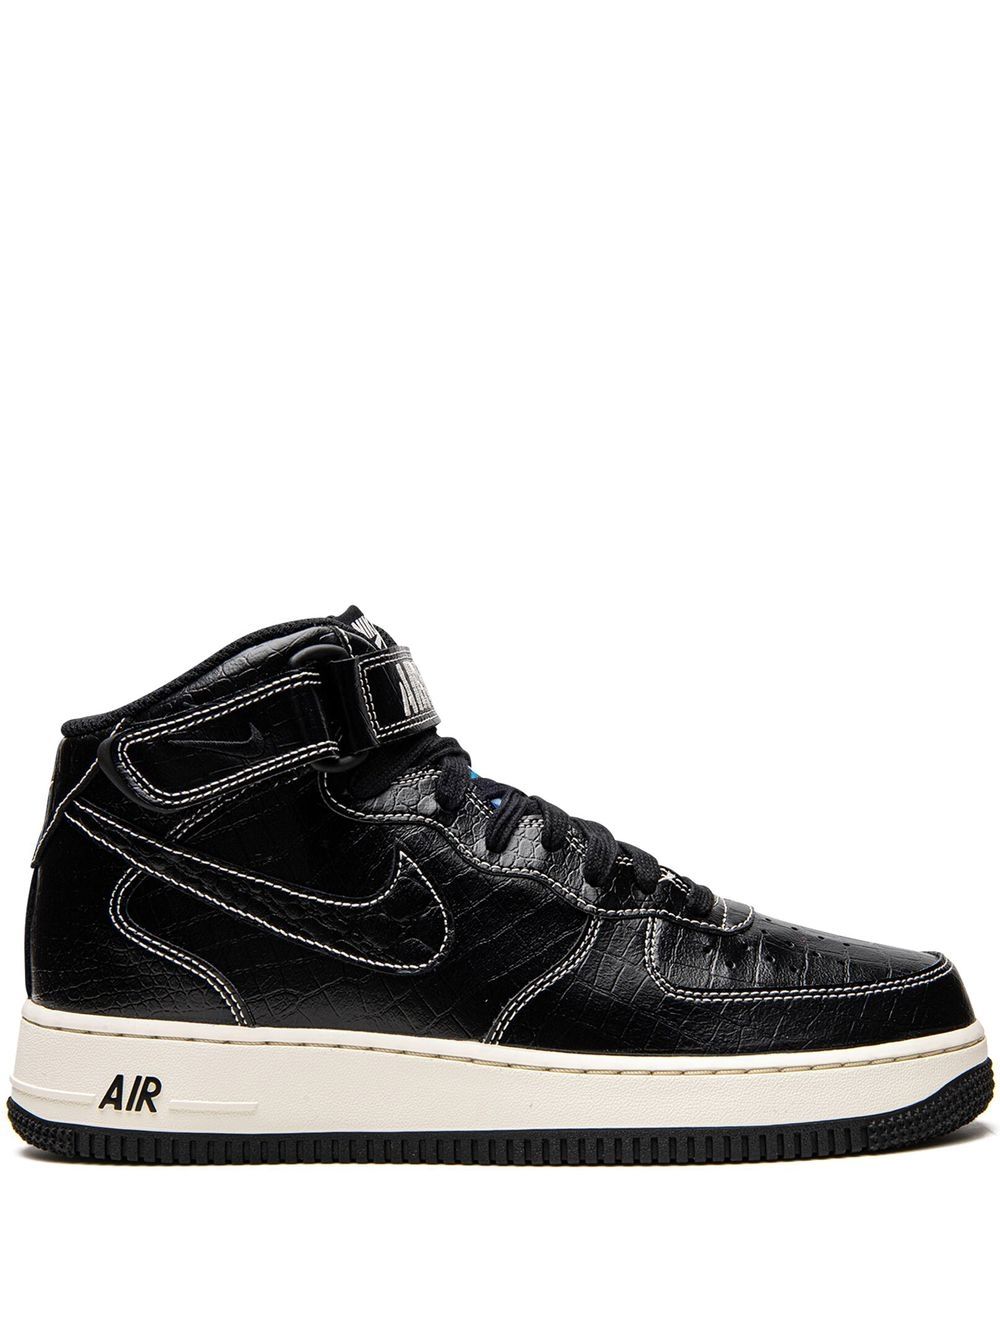 Image 1 of Nike Air Force 1 Mid LX "Our Force 1" sneakers